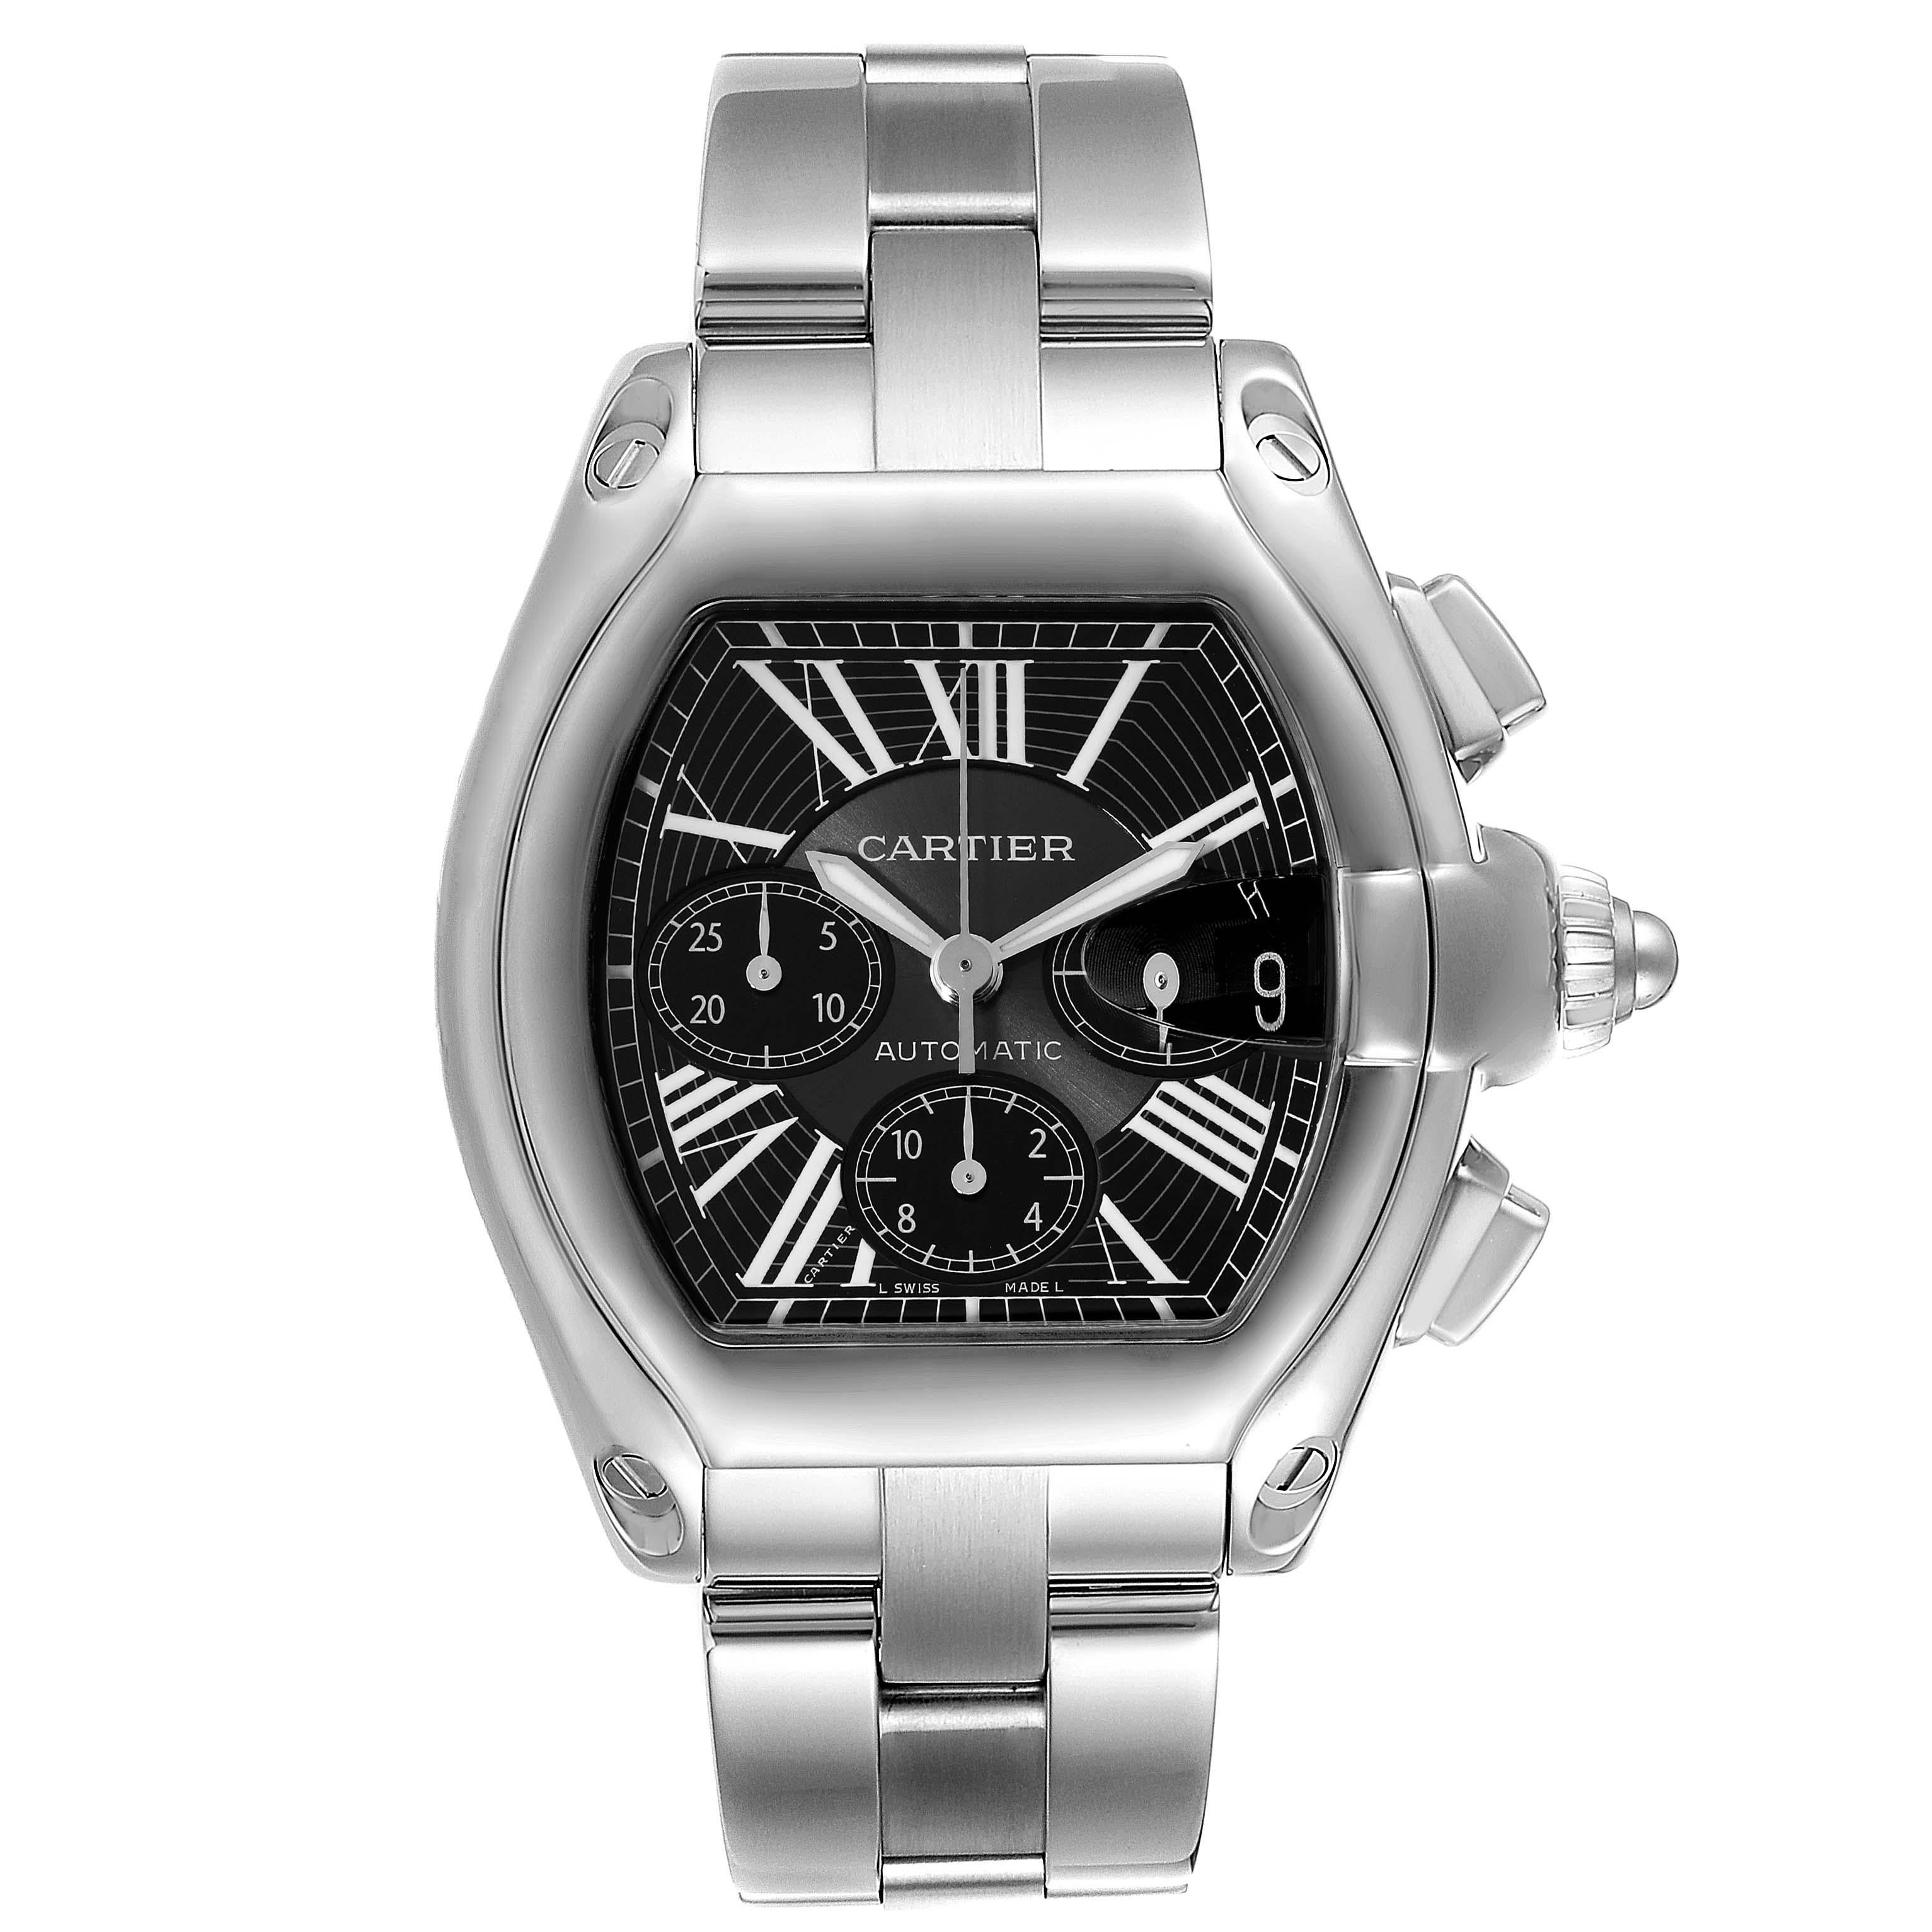 Cartier Roadster XL Chronograph Black Dial Steel Mens Watch W62020X6. Automatic self-winding movement with chronograph function. Stainless steel tonneau shaped case 49 x 43 mm. . Scratch resistant sapphire crystal with cyclops magnifying glass.